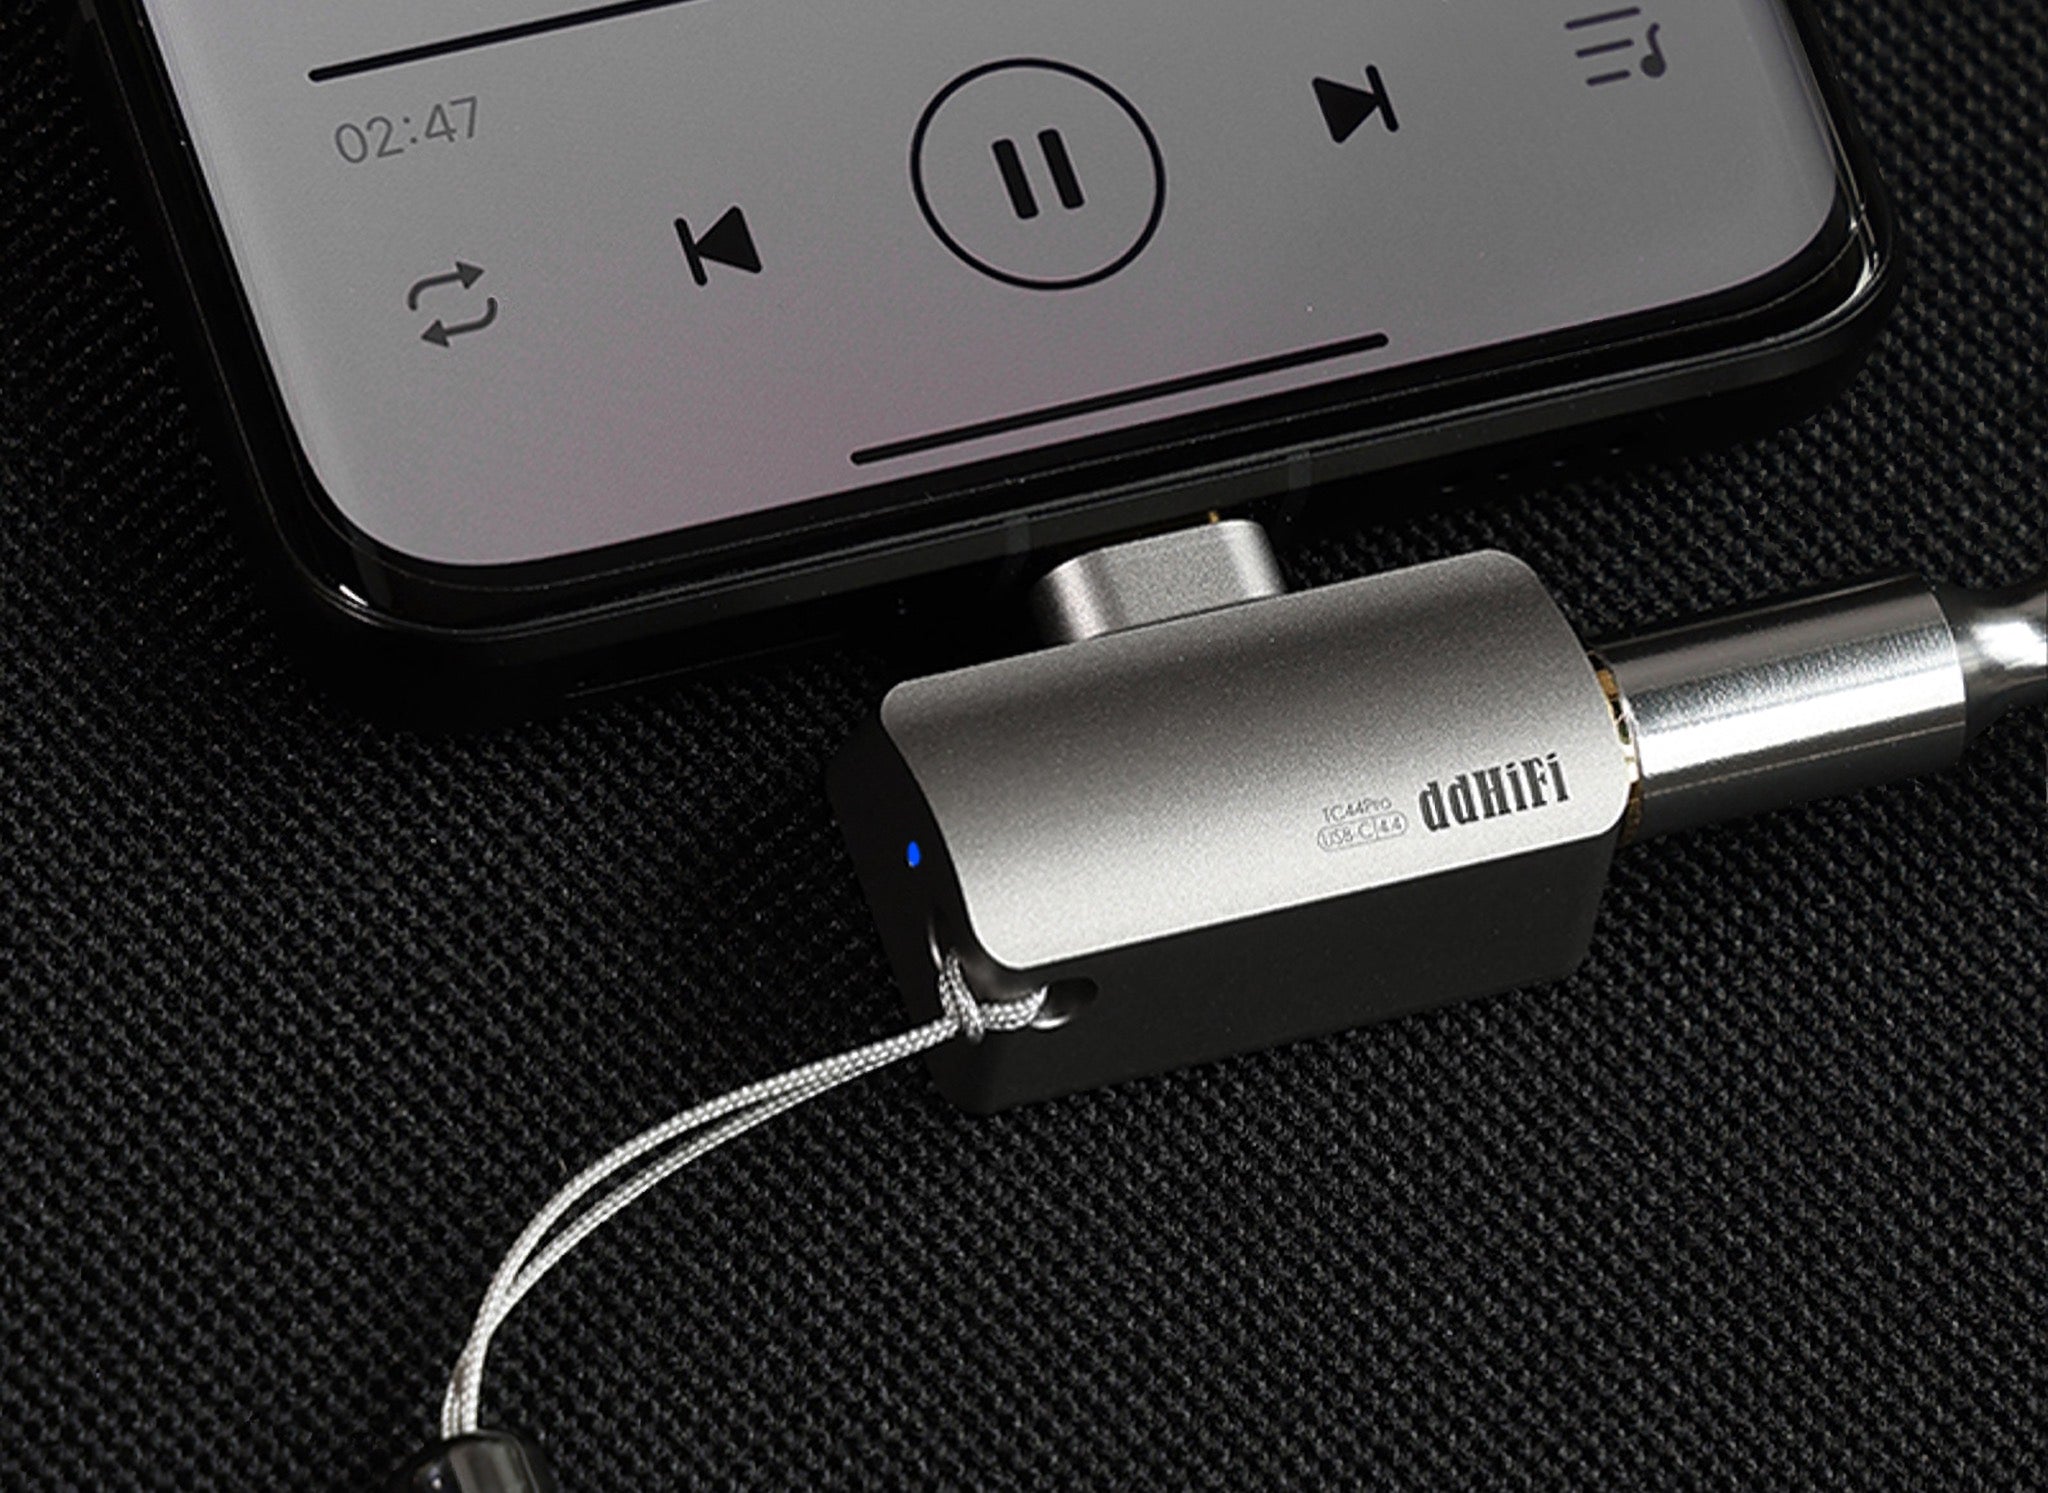 ddHiFi TC44Pro USB-C connected to mobile phone with attached lanyard, highlighting indicator light